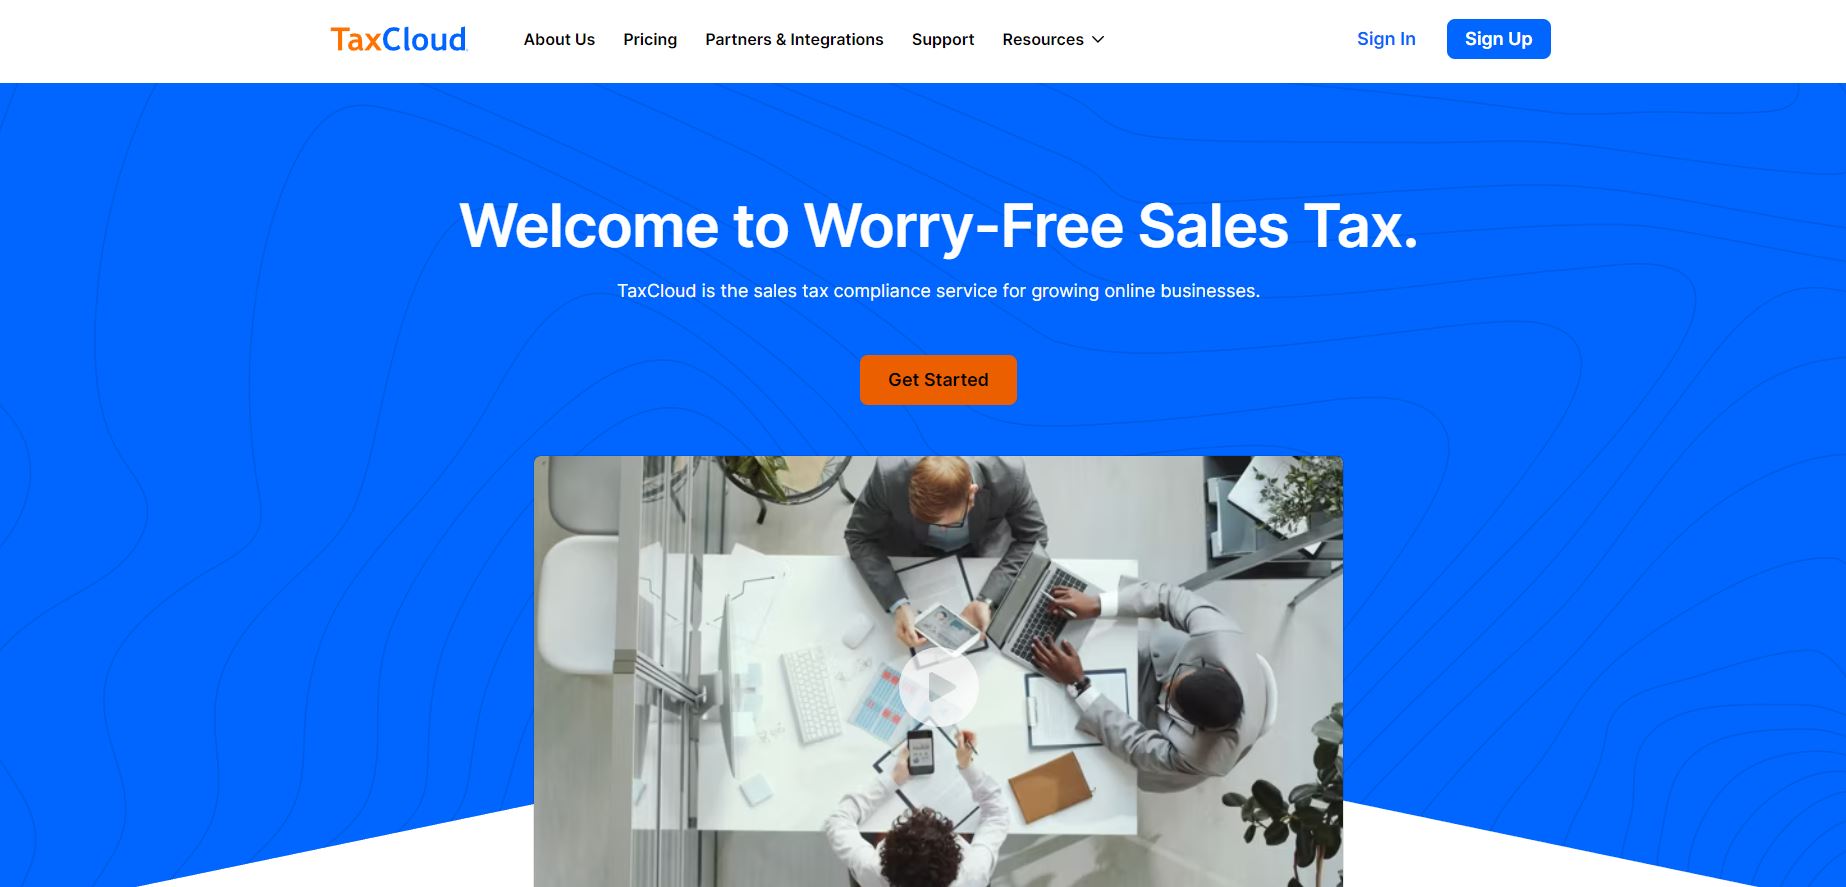 TaxCloud, the reliable and innovative sales tax compliance service that has raised $20 million